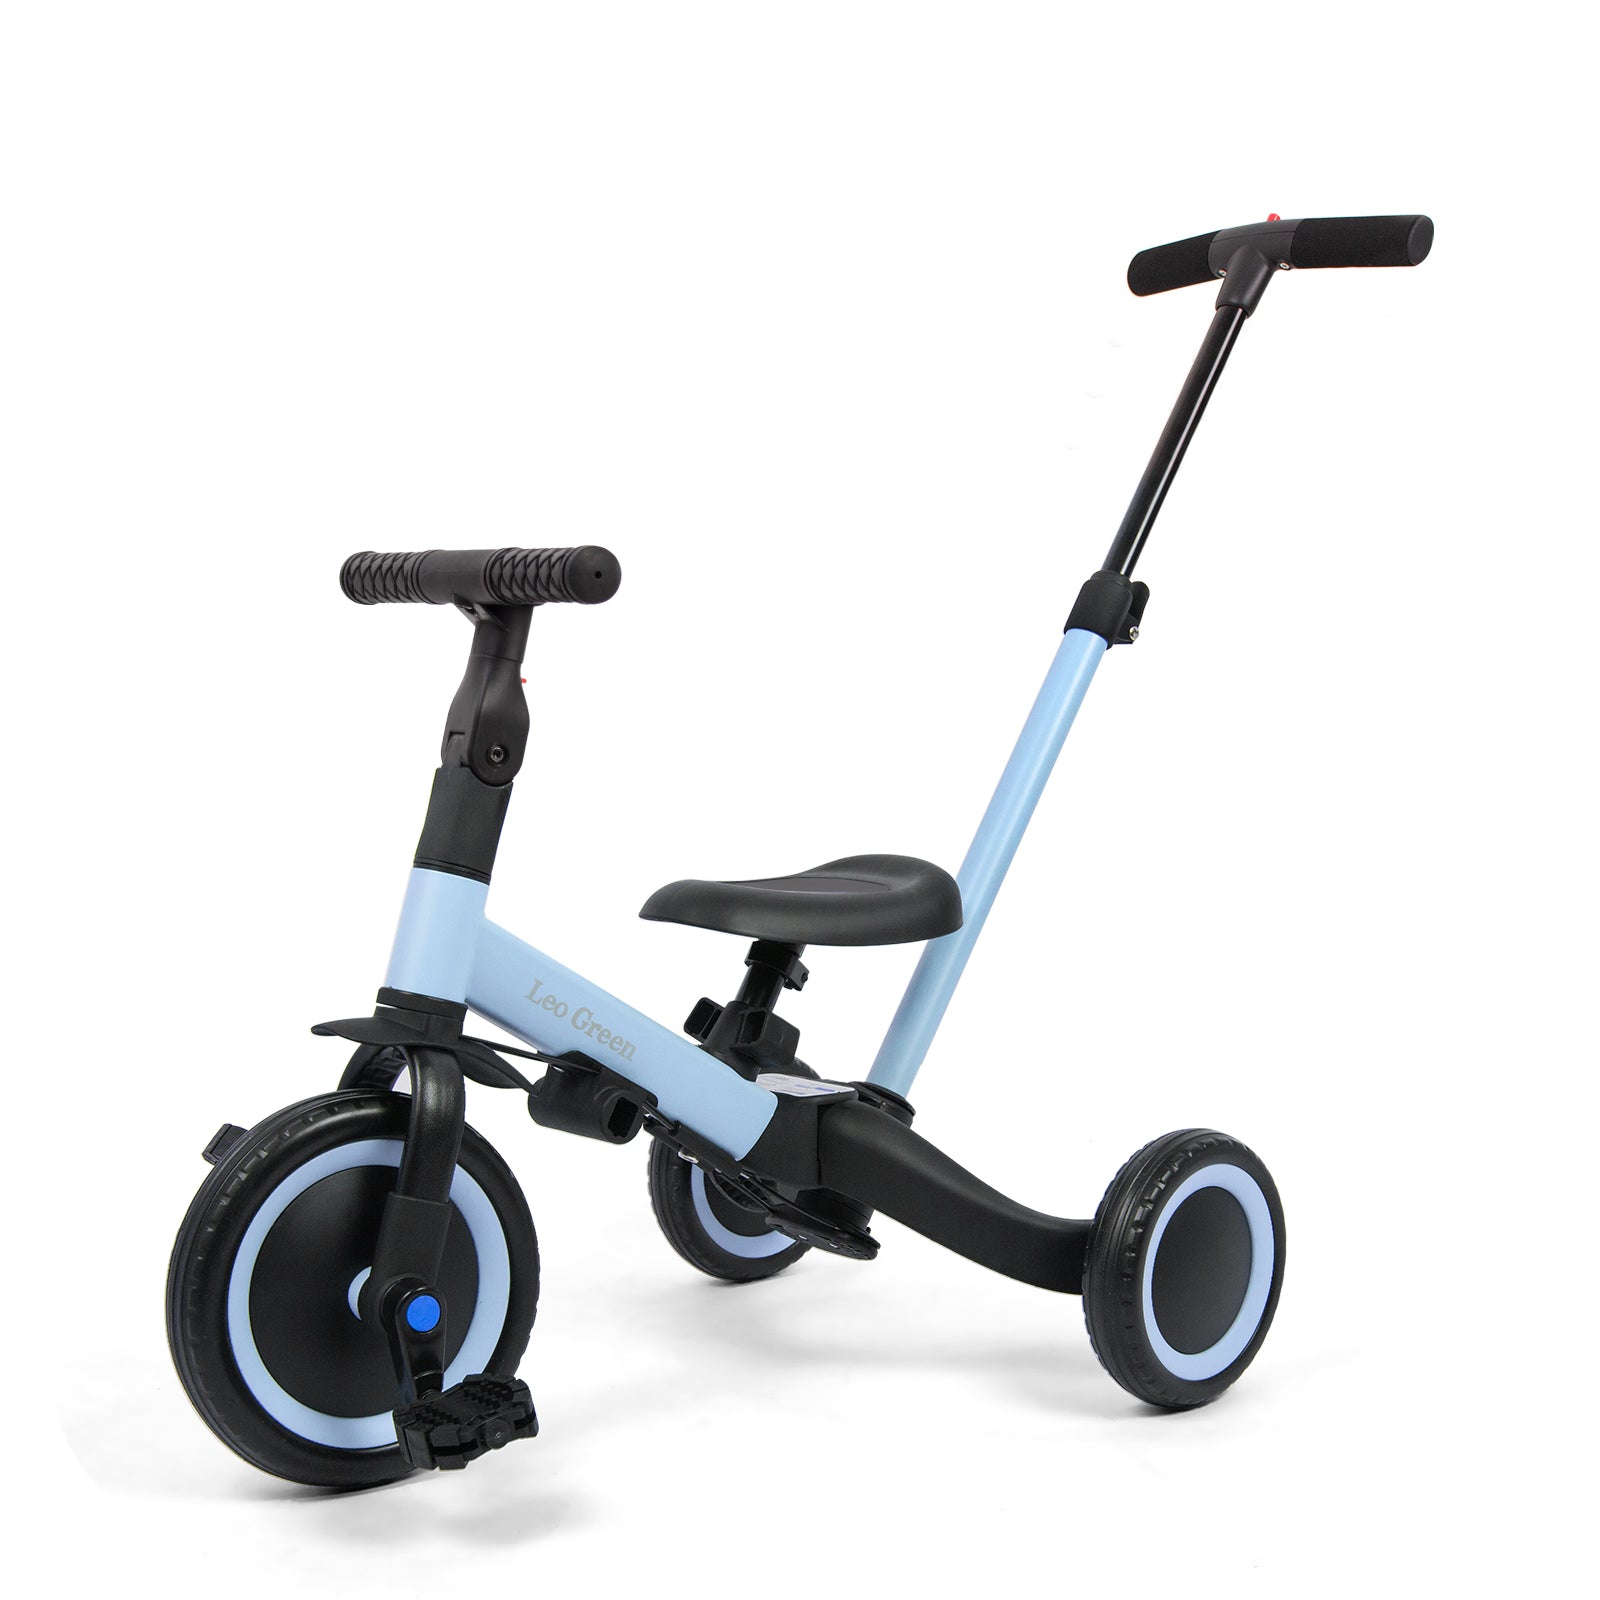 4-in-1-Children-s-Tricycle-Bike-Balance-Bike-Balance-Bike-with-Push-Bar-for-Boys-Girls-Ages-1-to-3-Load-25-kg-Blue-4-in-1-Children-s-Tricycle-Bike-Blue